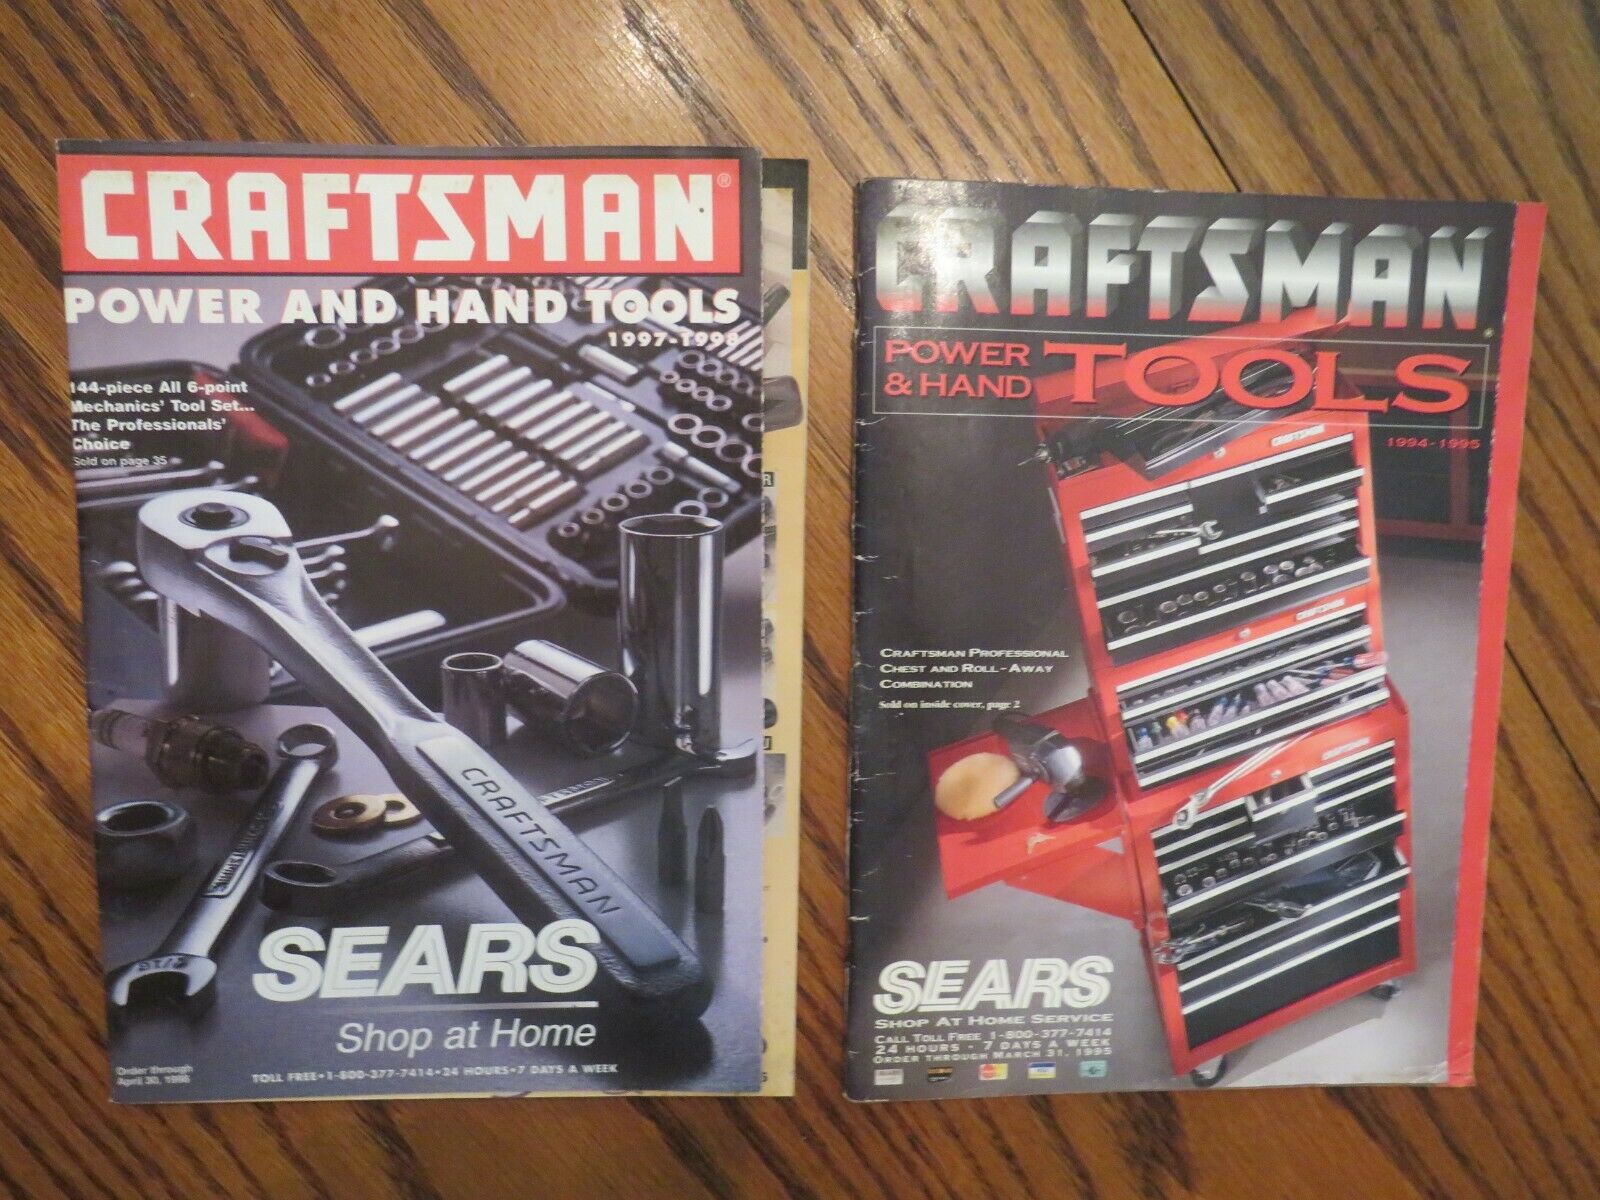 2 Sears Craftsman Tool Catalogs 1994-95 & 1997-98 In Good Condition